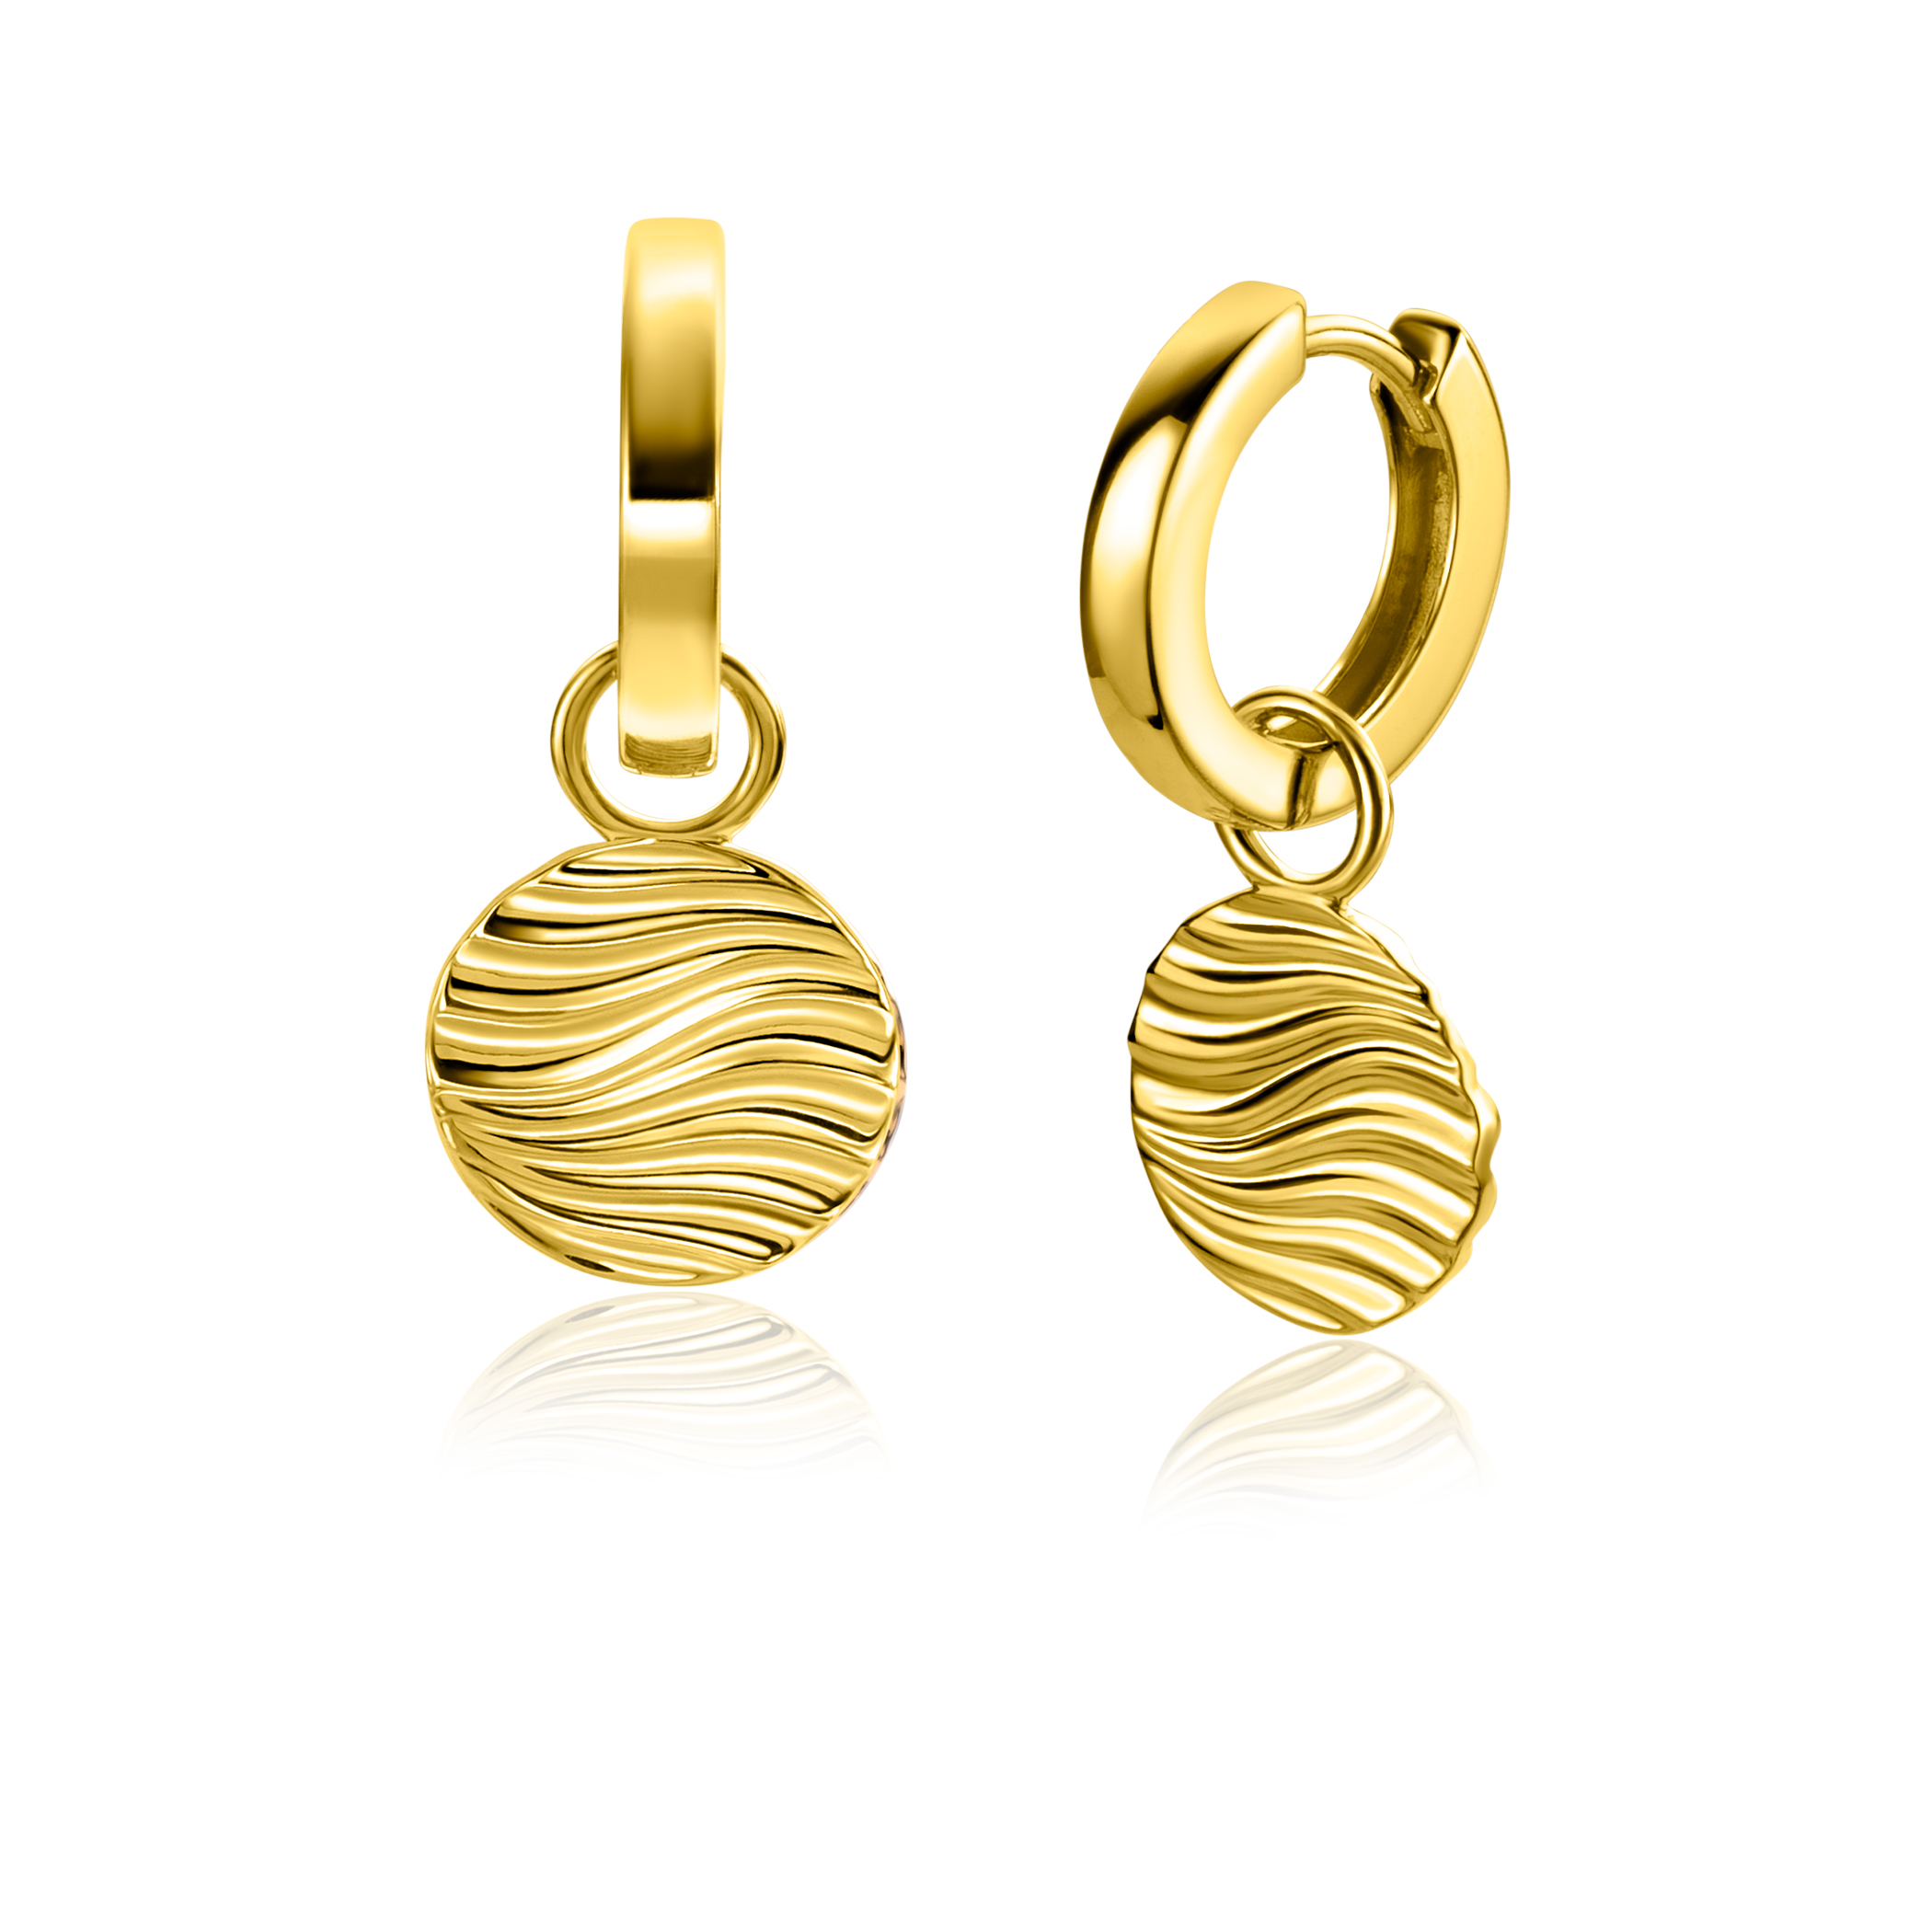 12mm ZINZI Gold Plated Sterling Silver Earrings Pendants Round with Graceful Wave Design ZICH2450 (excl. hoop earrings)